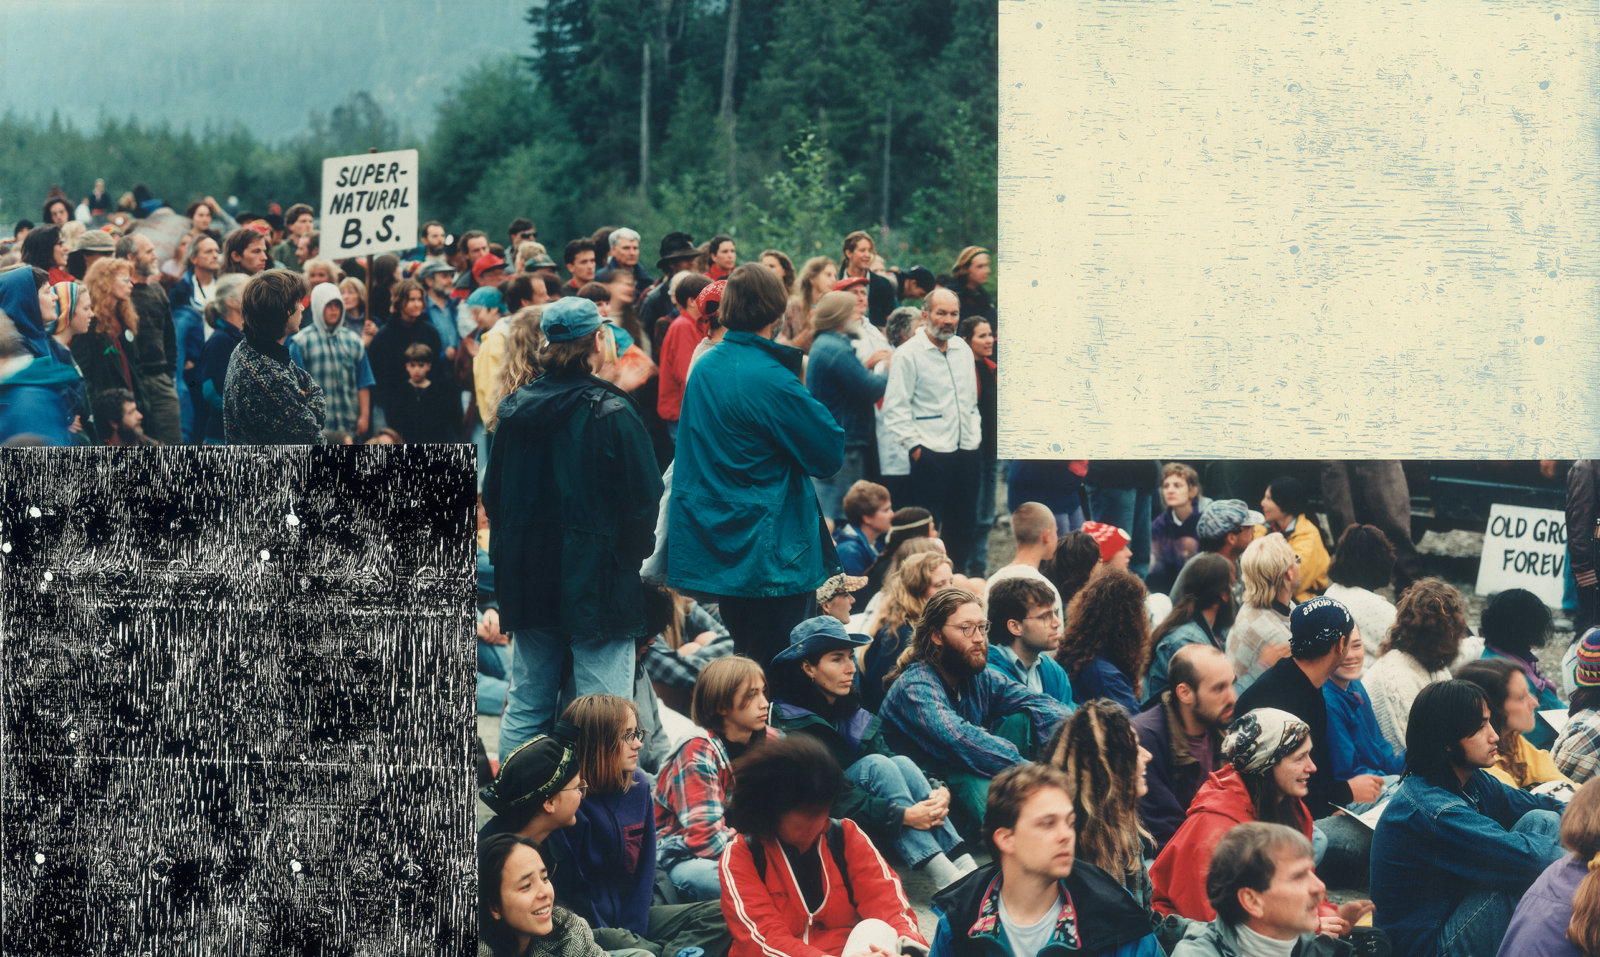 Ian Wallace, Clayoquot Protest (August 9, 1993) IV, 1993–1995, photolaminate with acrylic on canvas, 72 x 120 x 1 in. (184 x 306 x 3 cm)